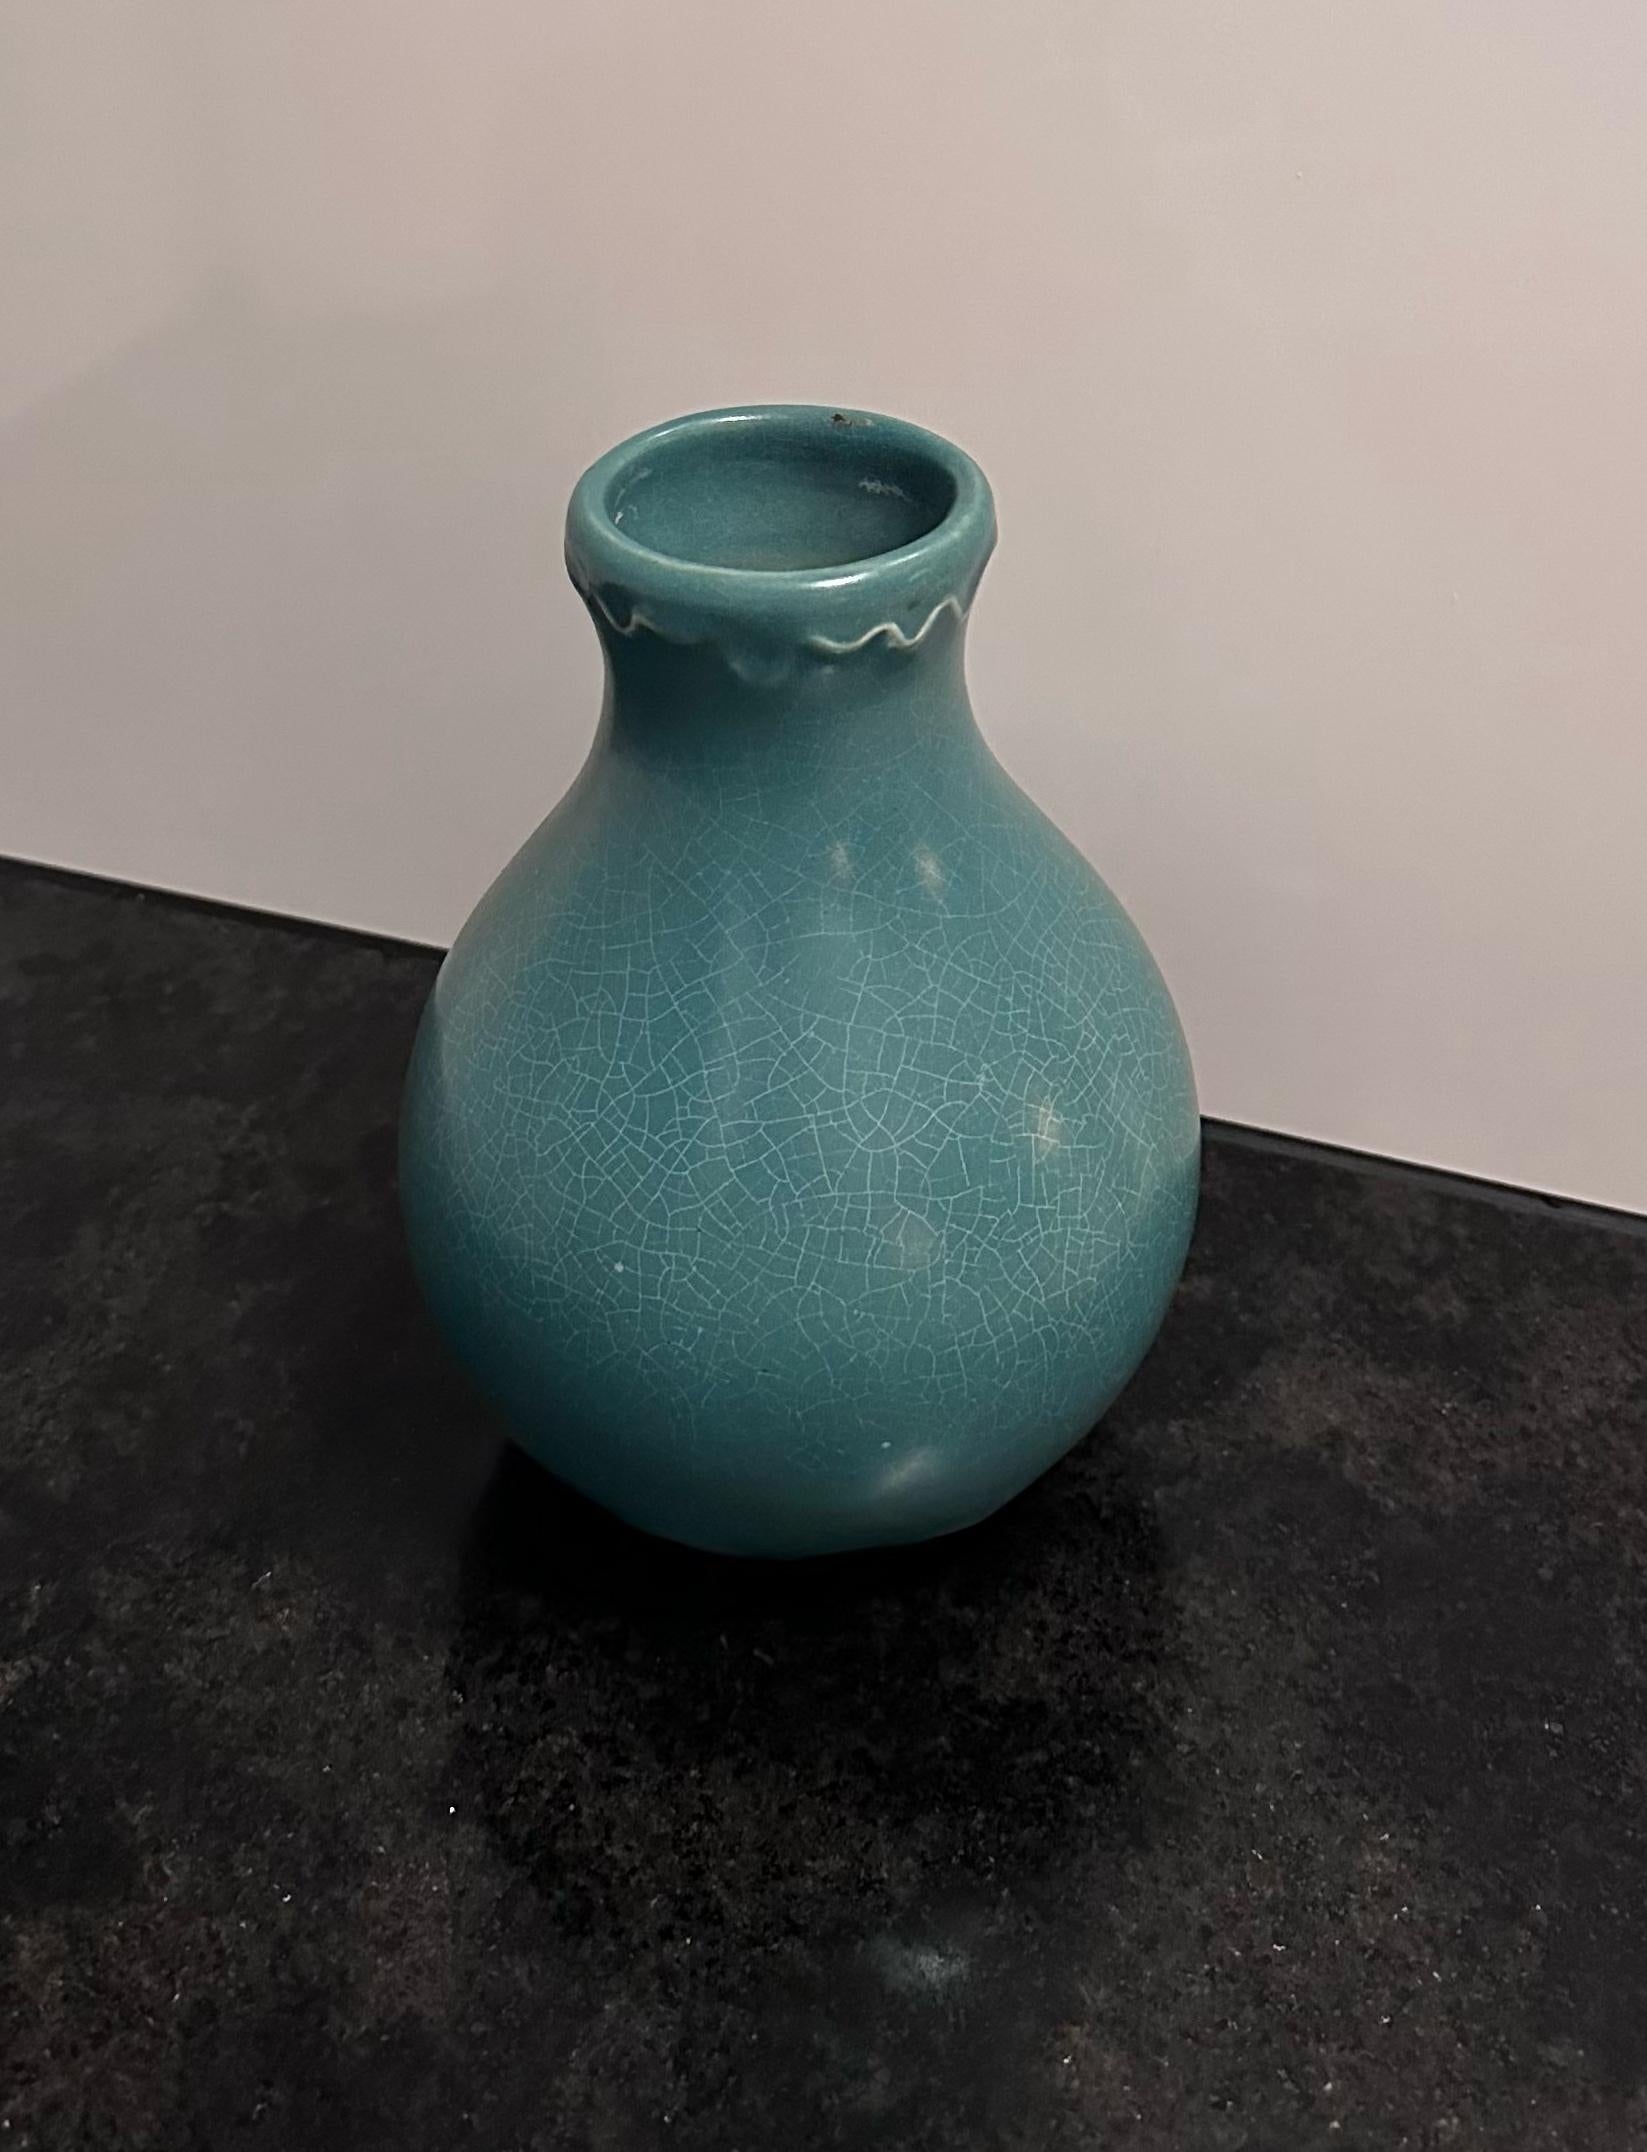 Giovanni Gariboldi (1908 - 1971) for Richard Ginori
An important craquelé ceramic vase by Giovanni Gariboldi for Richard Ginori in matte blue tones, the neck and bottom decorated with undulating lines.
Stamped at the bottom with the number 6737 and